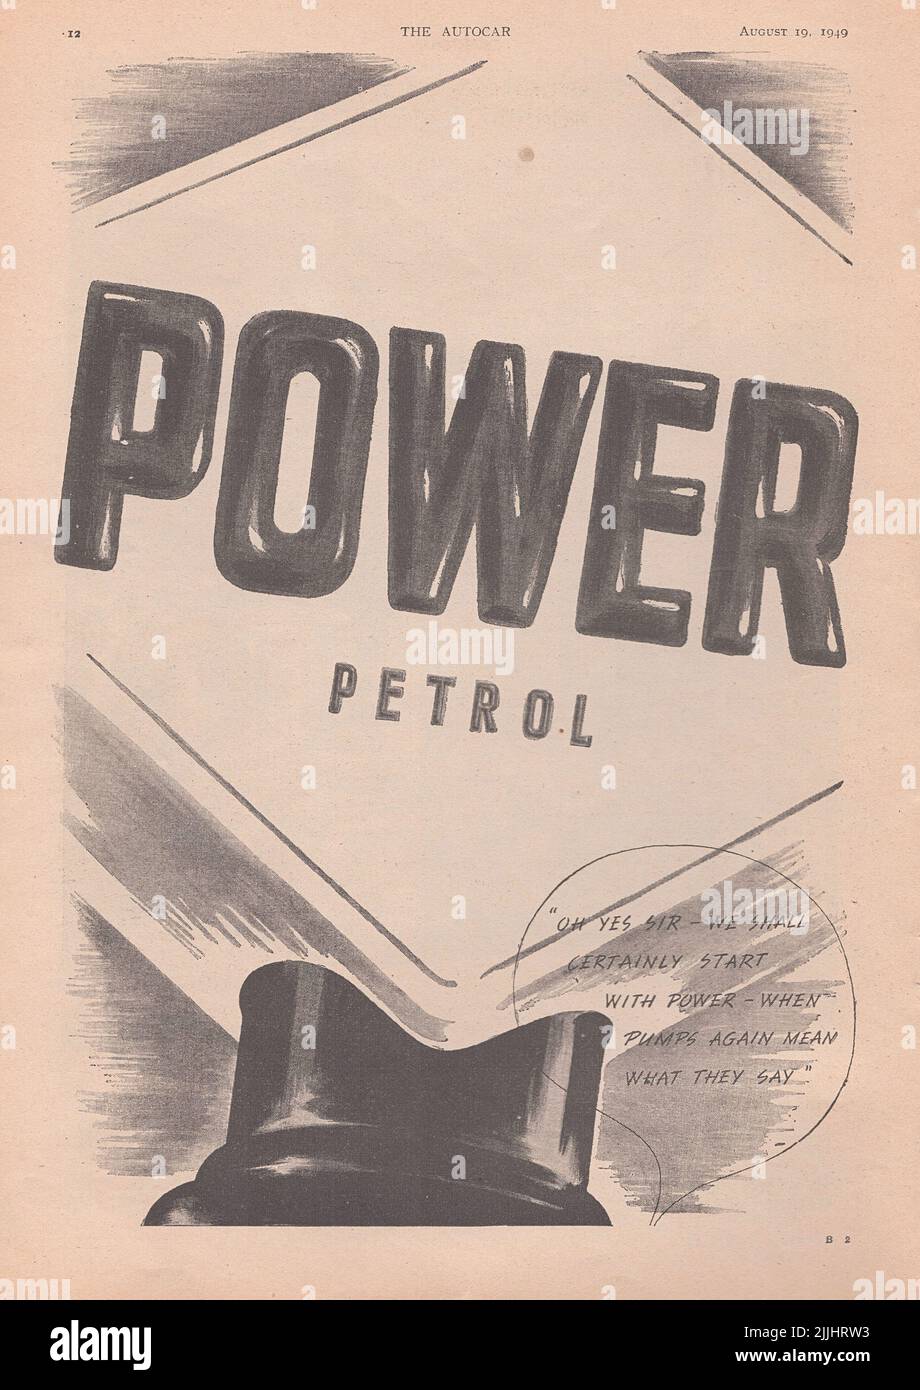 Power petrol old vintage advertisement from a UK car magazine Stock Photo